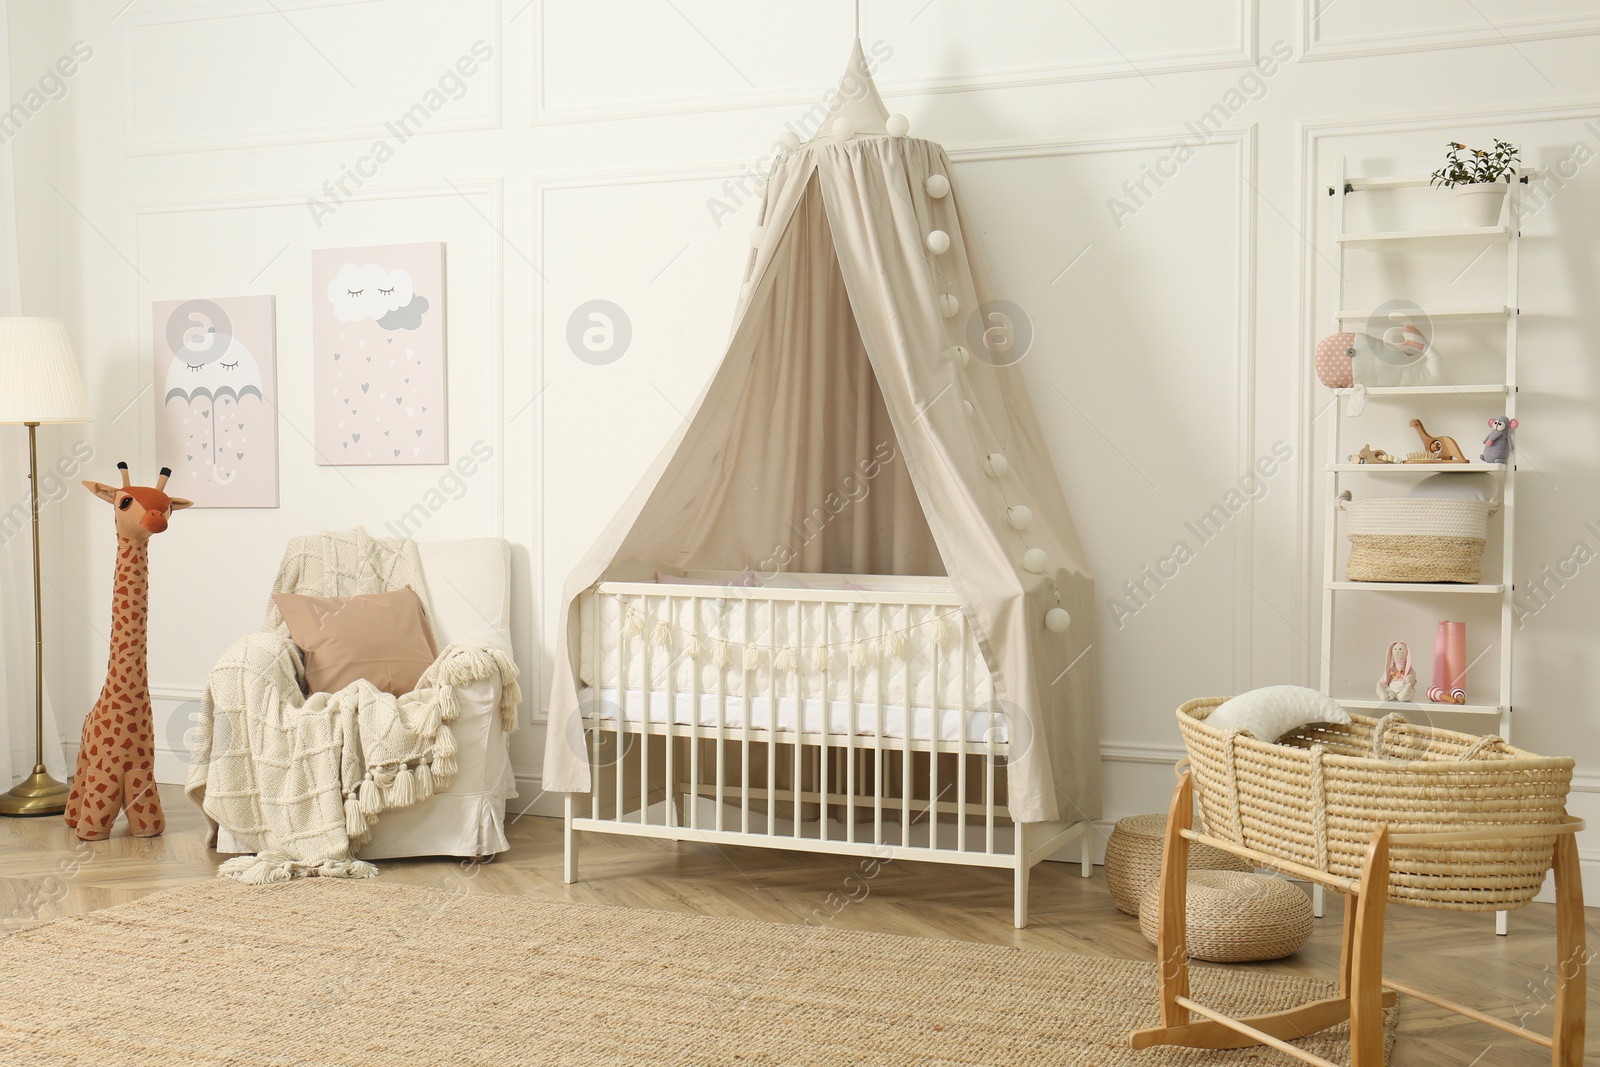 Photo of Baby room interior with toys and stylish furniture